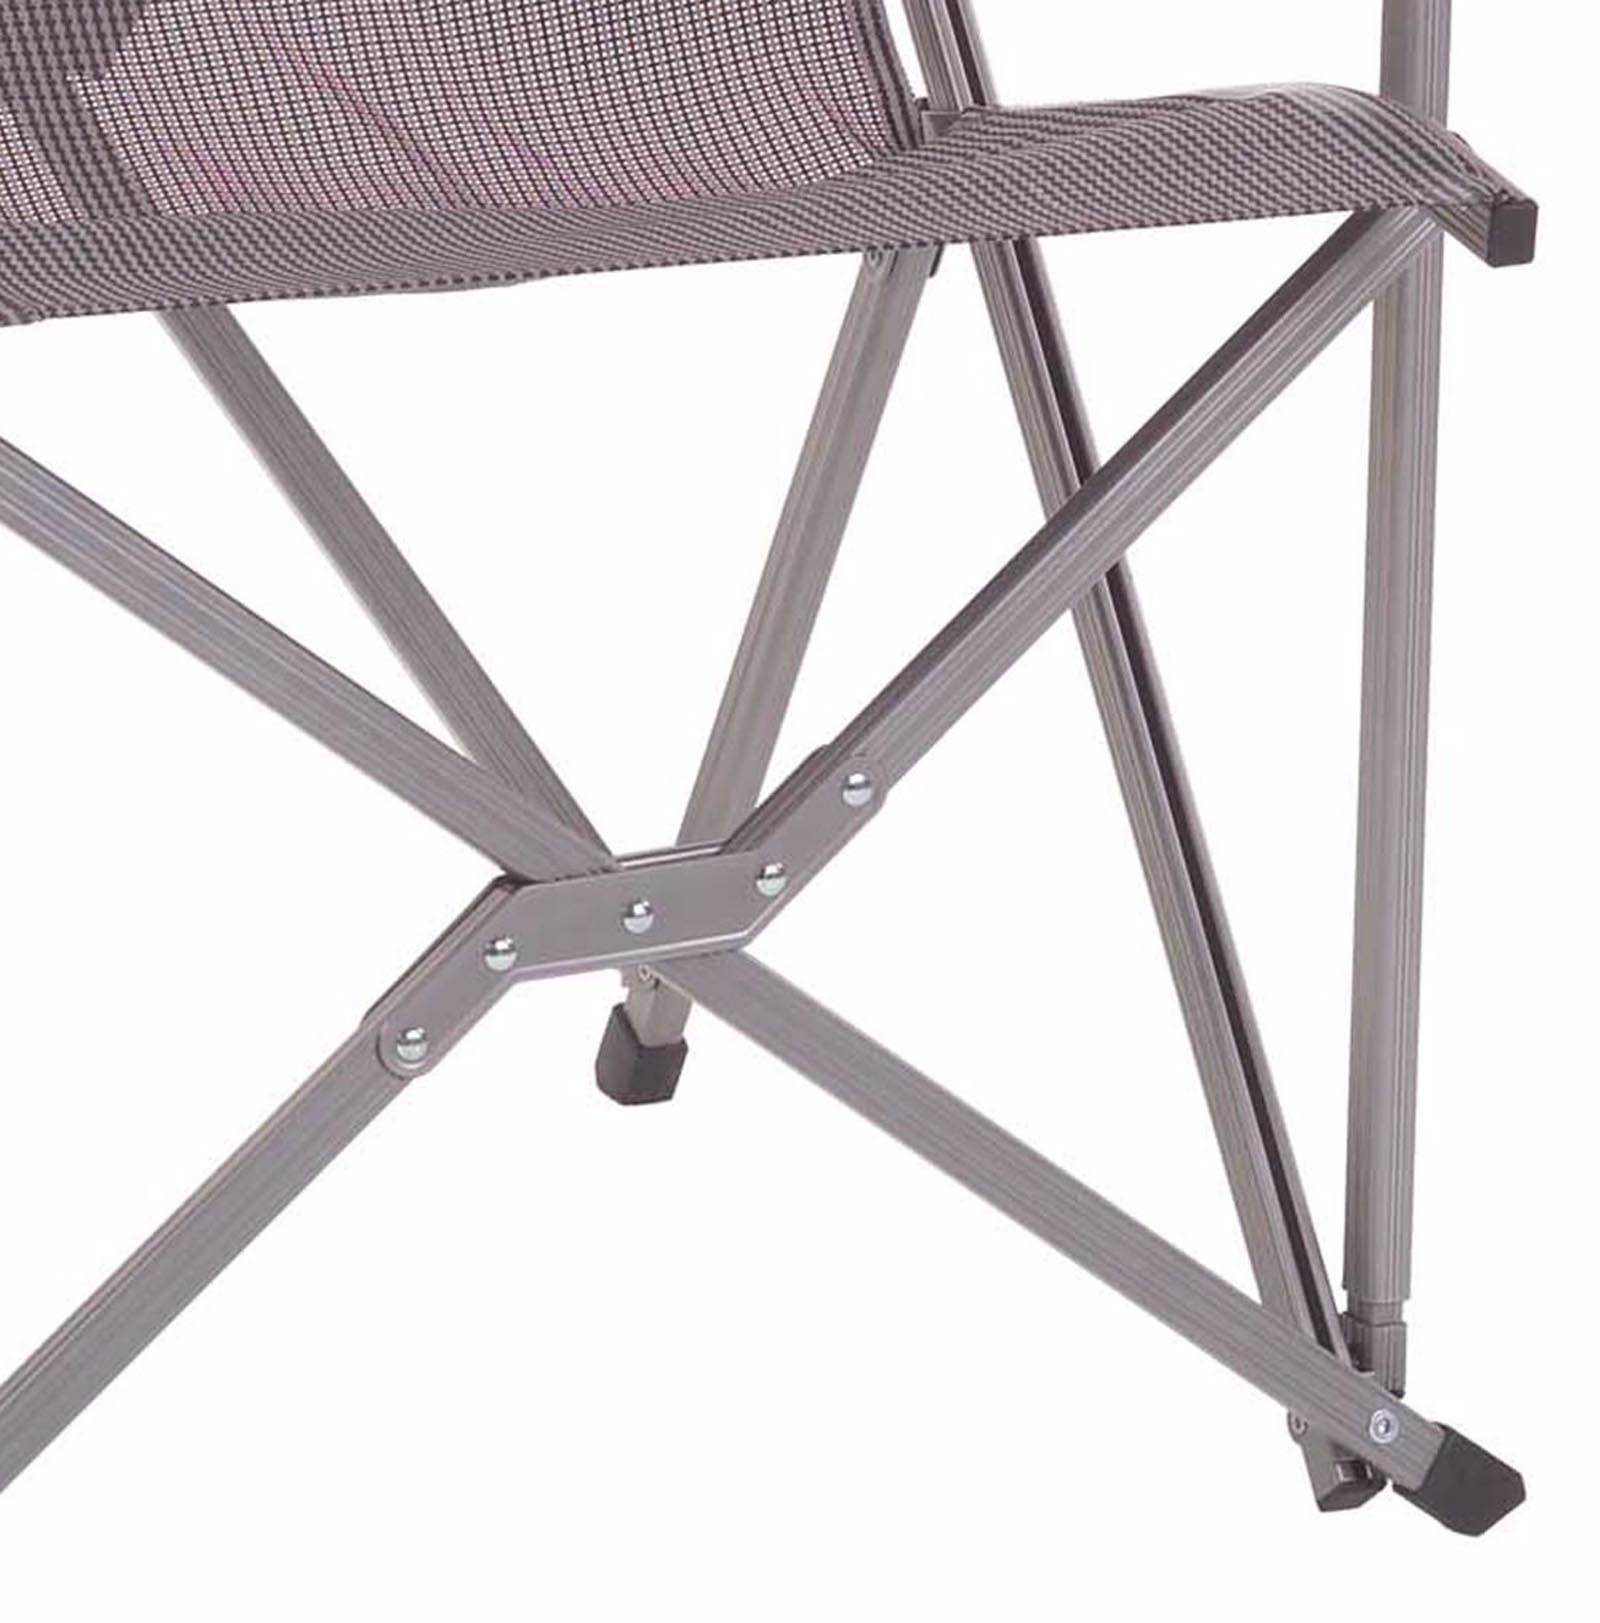 Coleman Patio Weather-Resistant Adult Sling Chair with Drink Holder, Gray - image 4 of 8